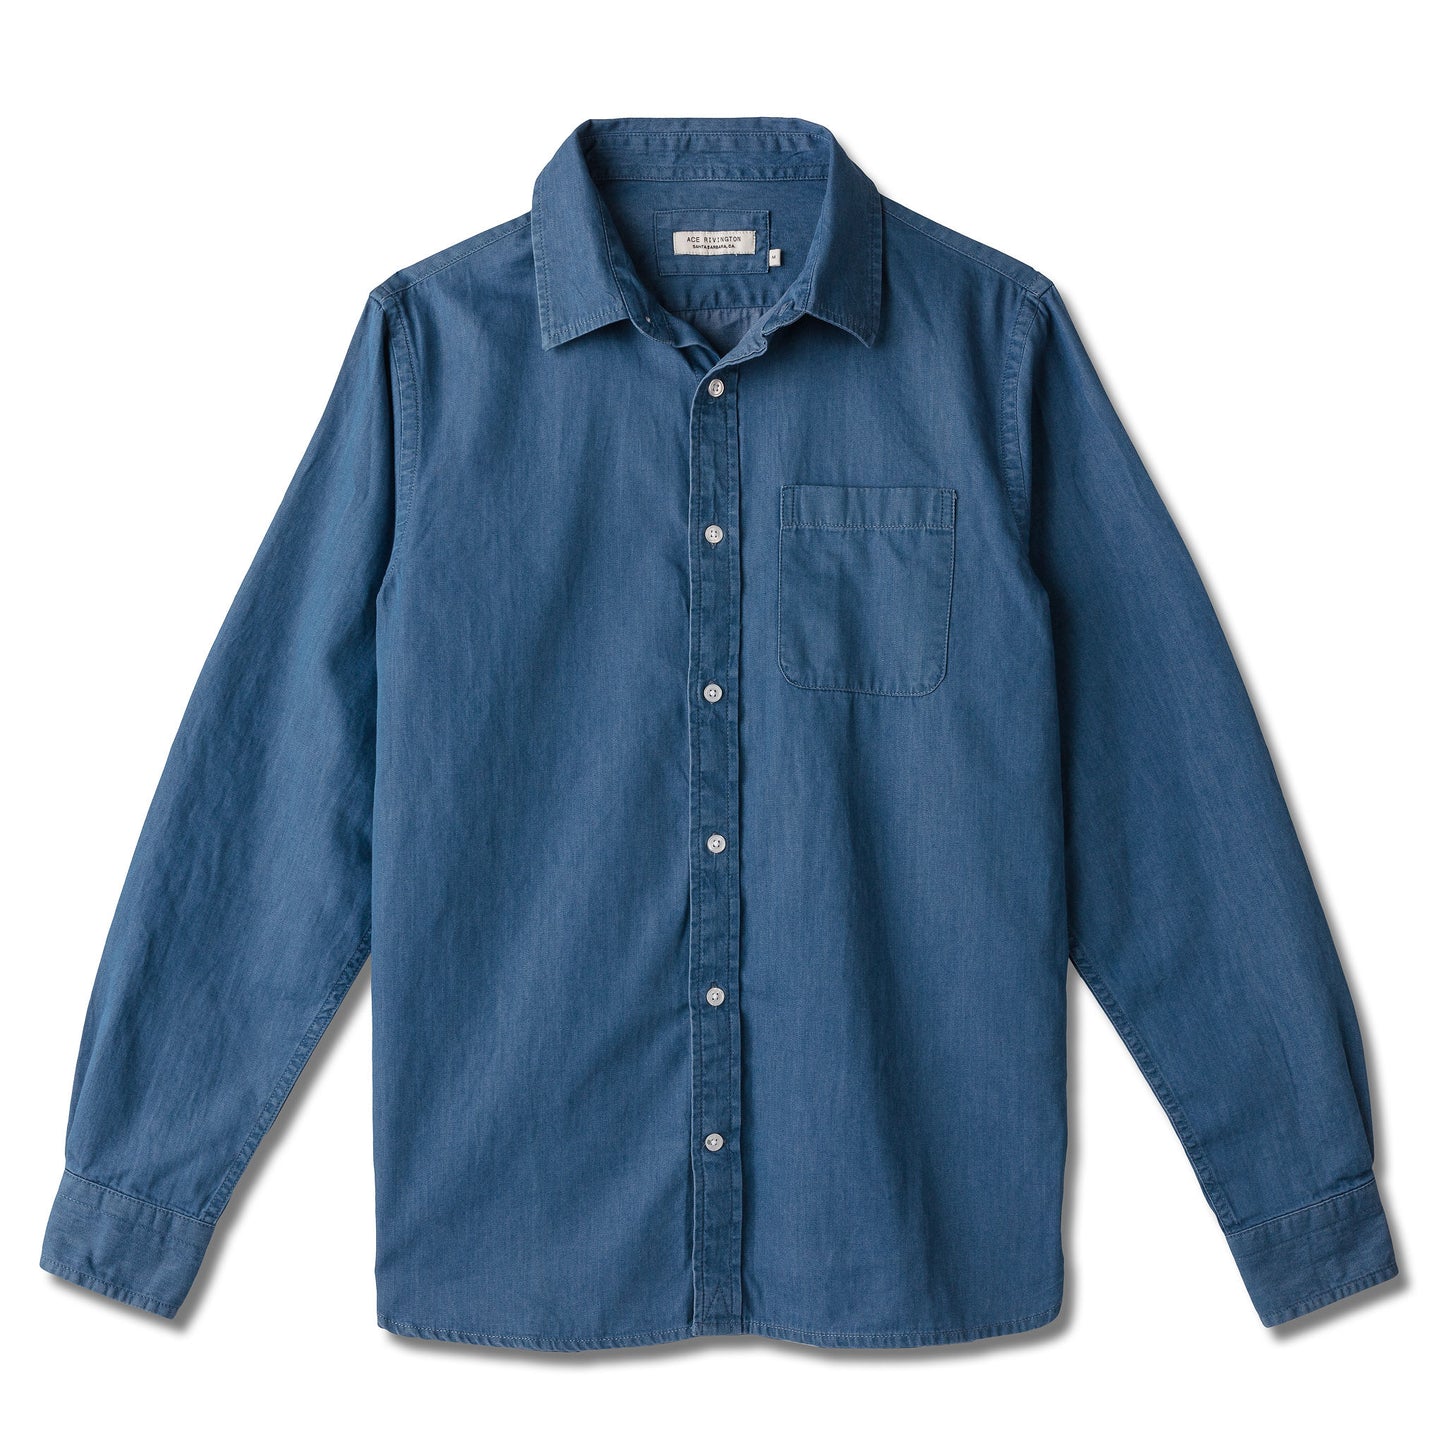 front of men's long sleeve tailored denim shirt in a medium wash with a single pocket and white buttons